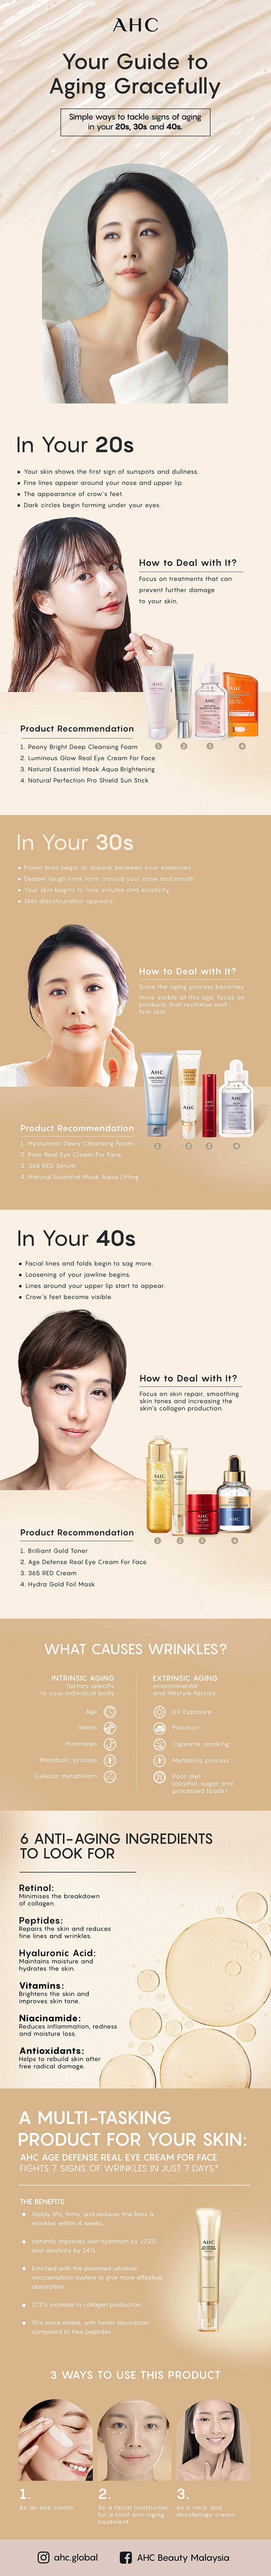 An AHC infographic to tackle sign of aging in your 20s, 30s, and 40s.